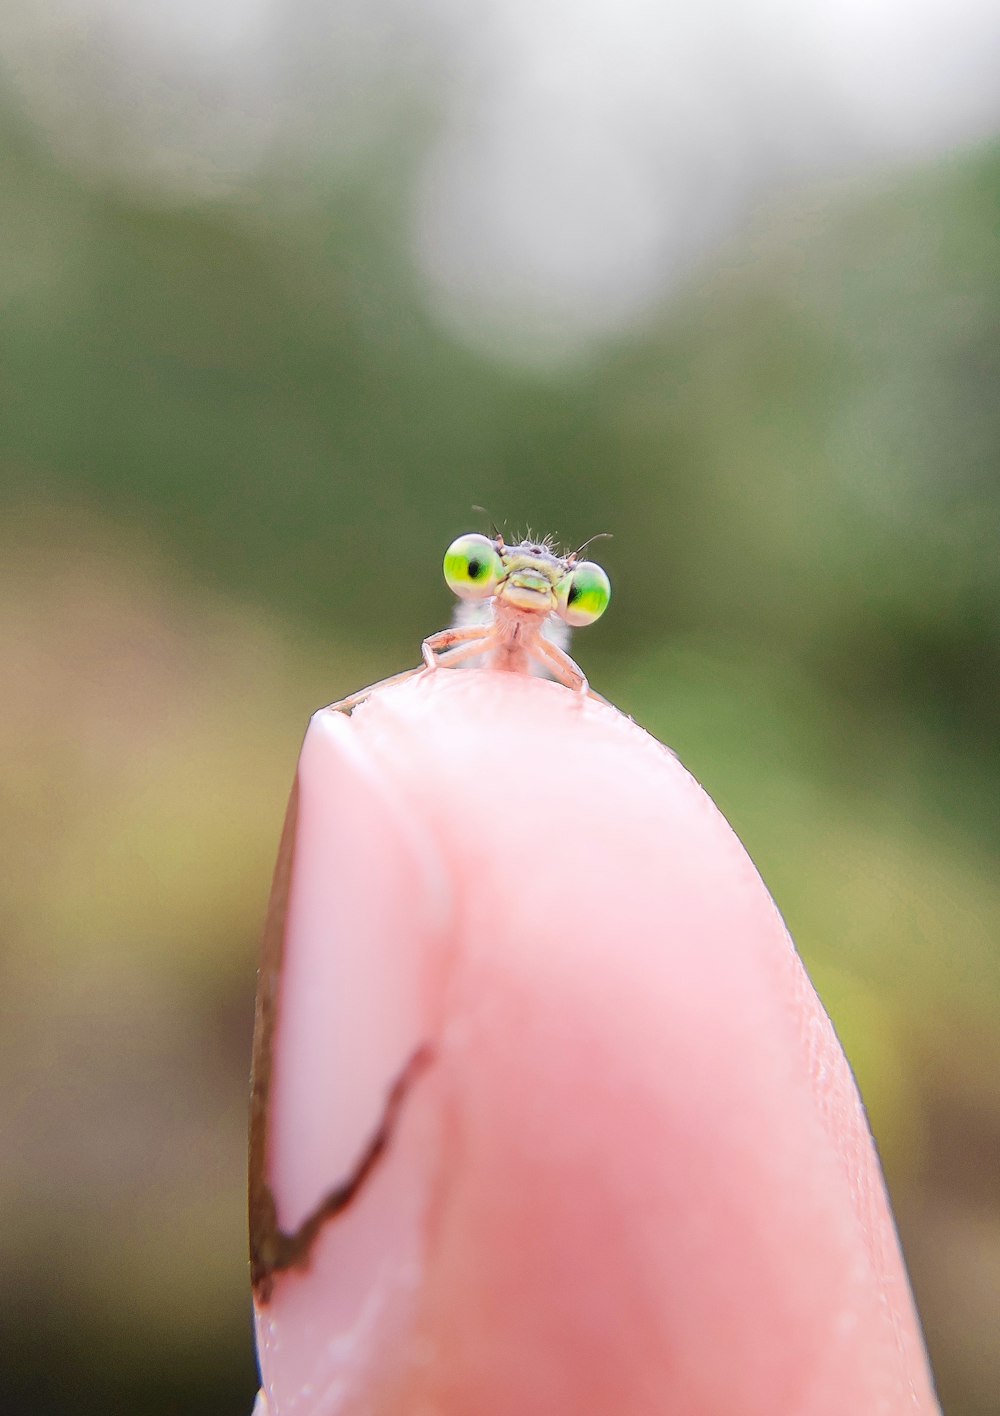 a tiny insect sitting on the tip of a finger